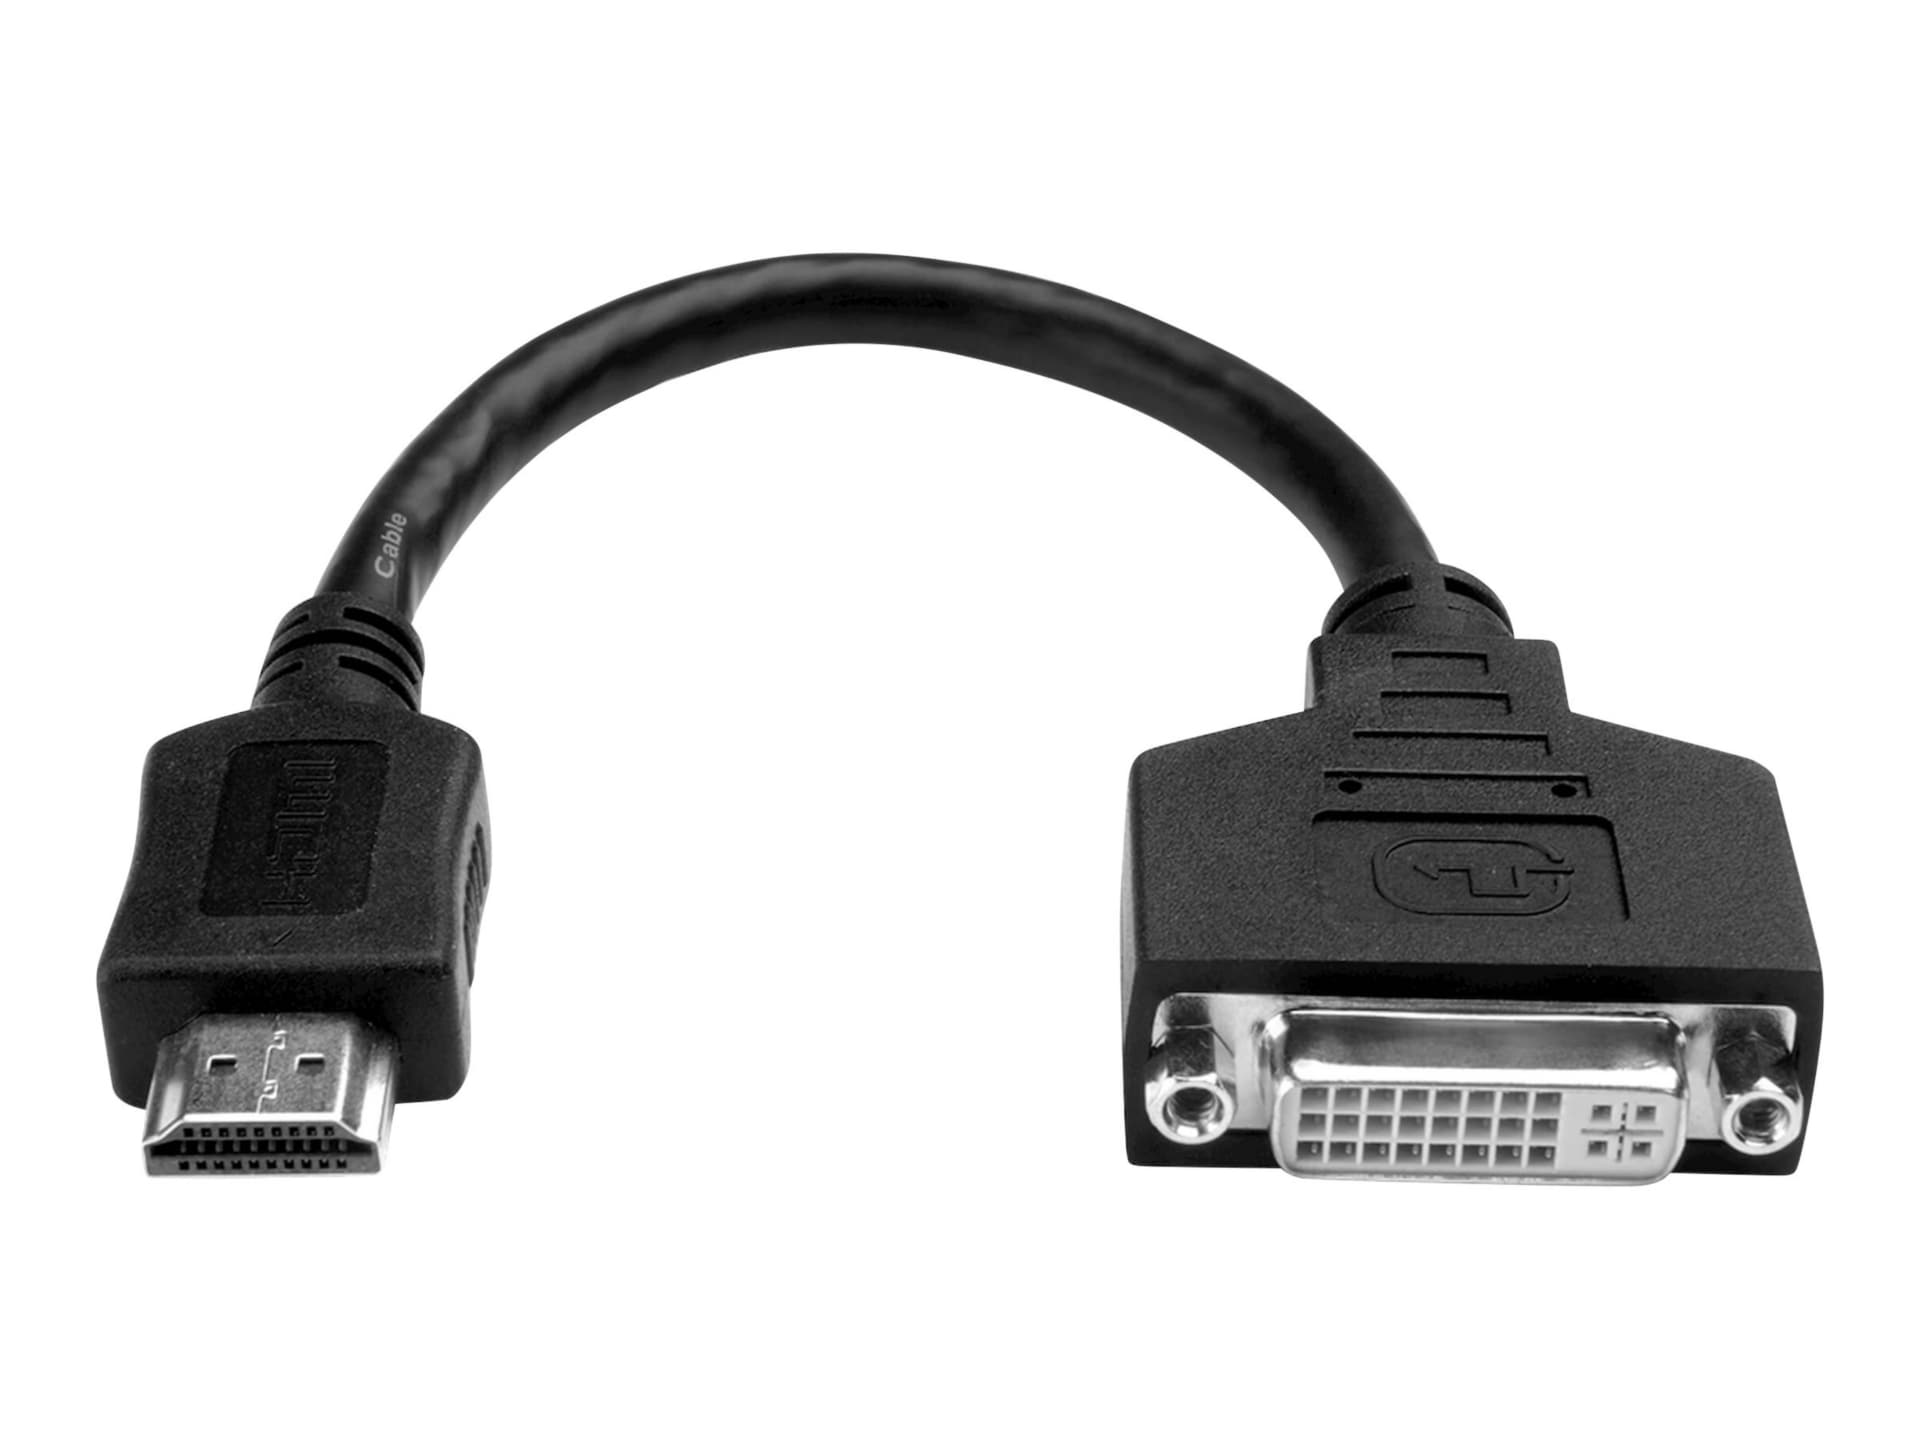 Tripp Lite 8in HDMI to DVI Cable Adapter Converter HDMI Male to DVI-D Female 8" - adapter - 8 in - P132-08N - Audio & Video - CDW.com